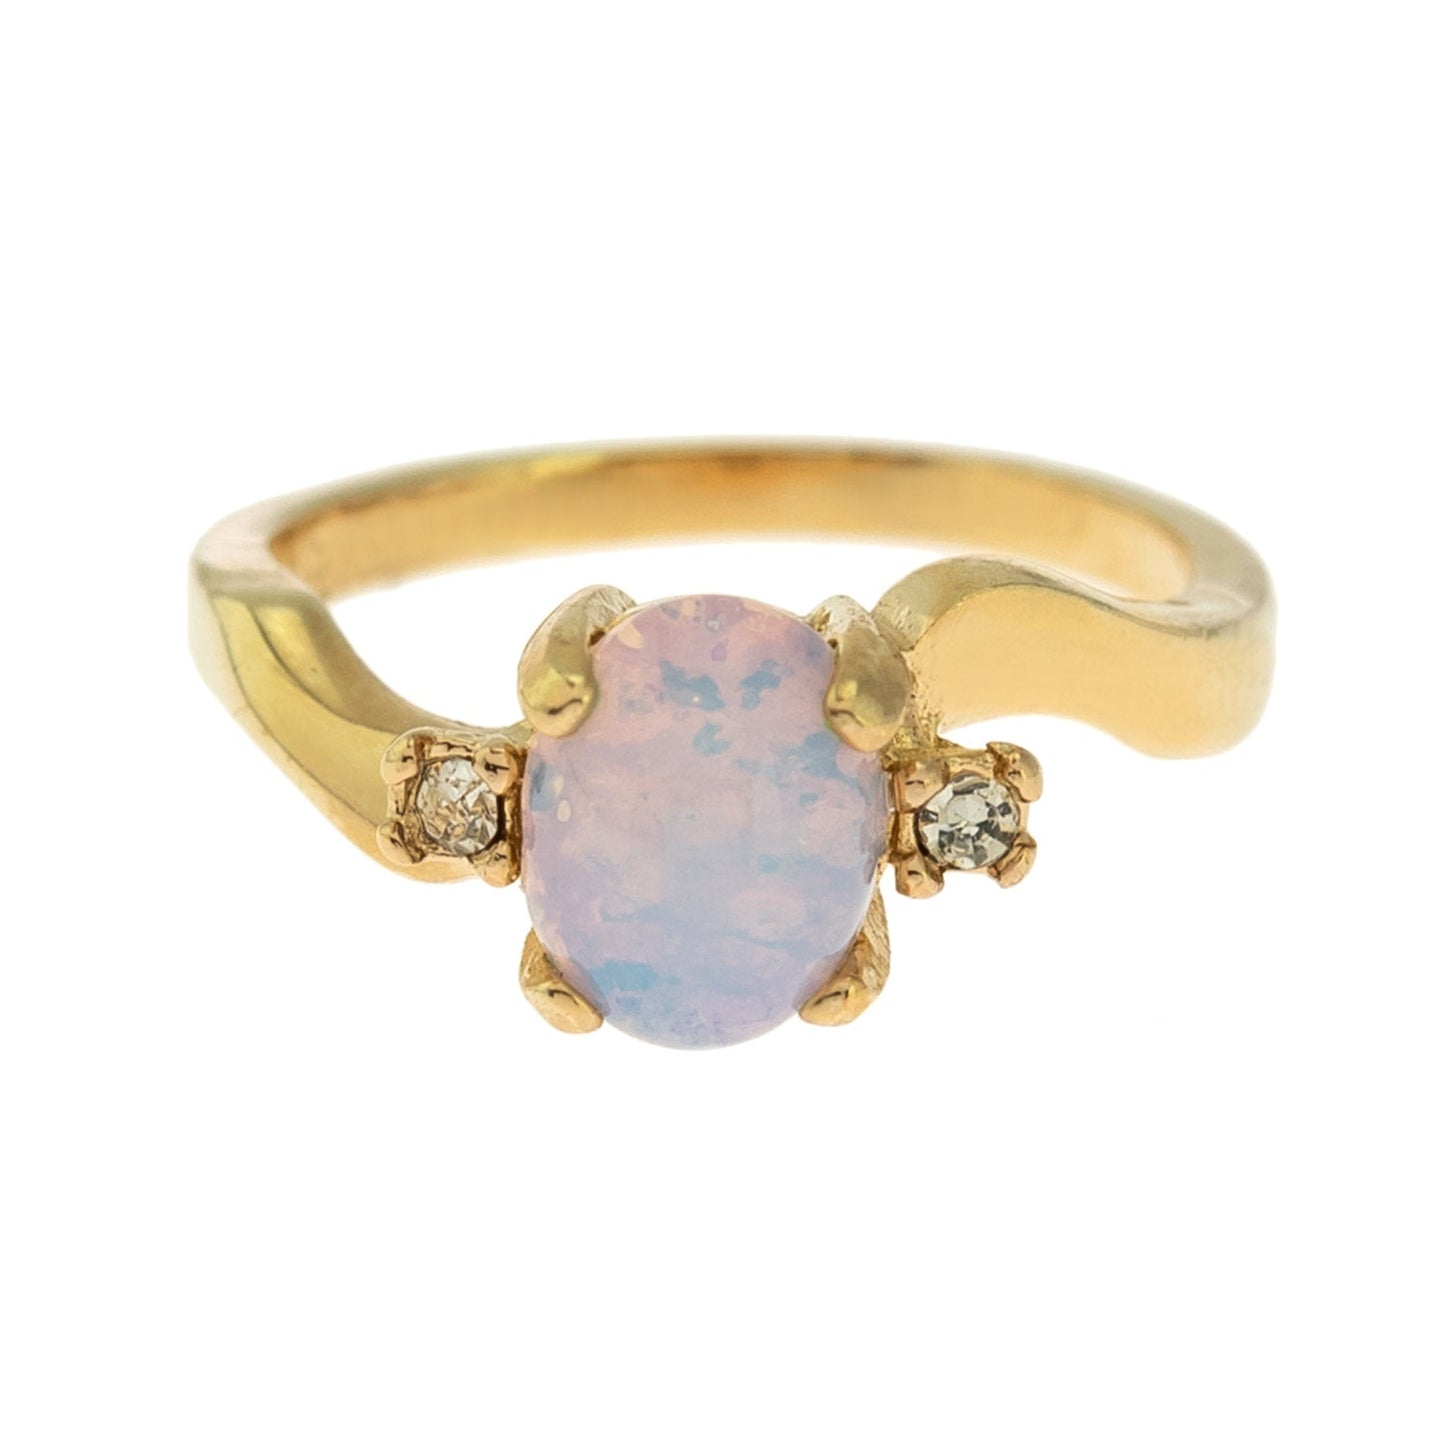 Vintage Pinfire Opal Ring with Clear Austrian Crystals 18k Yellow Gold Electroplated Band by PVD Vintage Jewelry